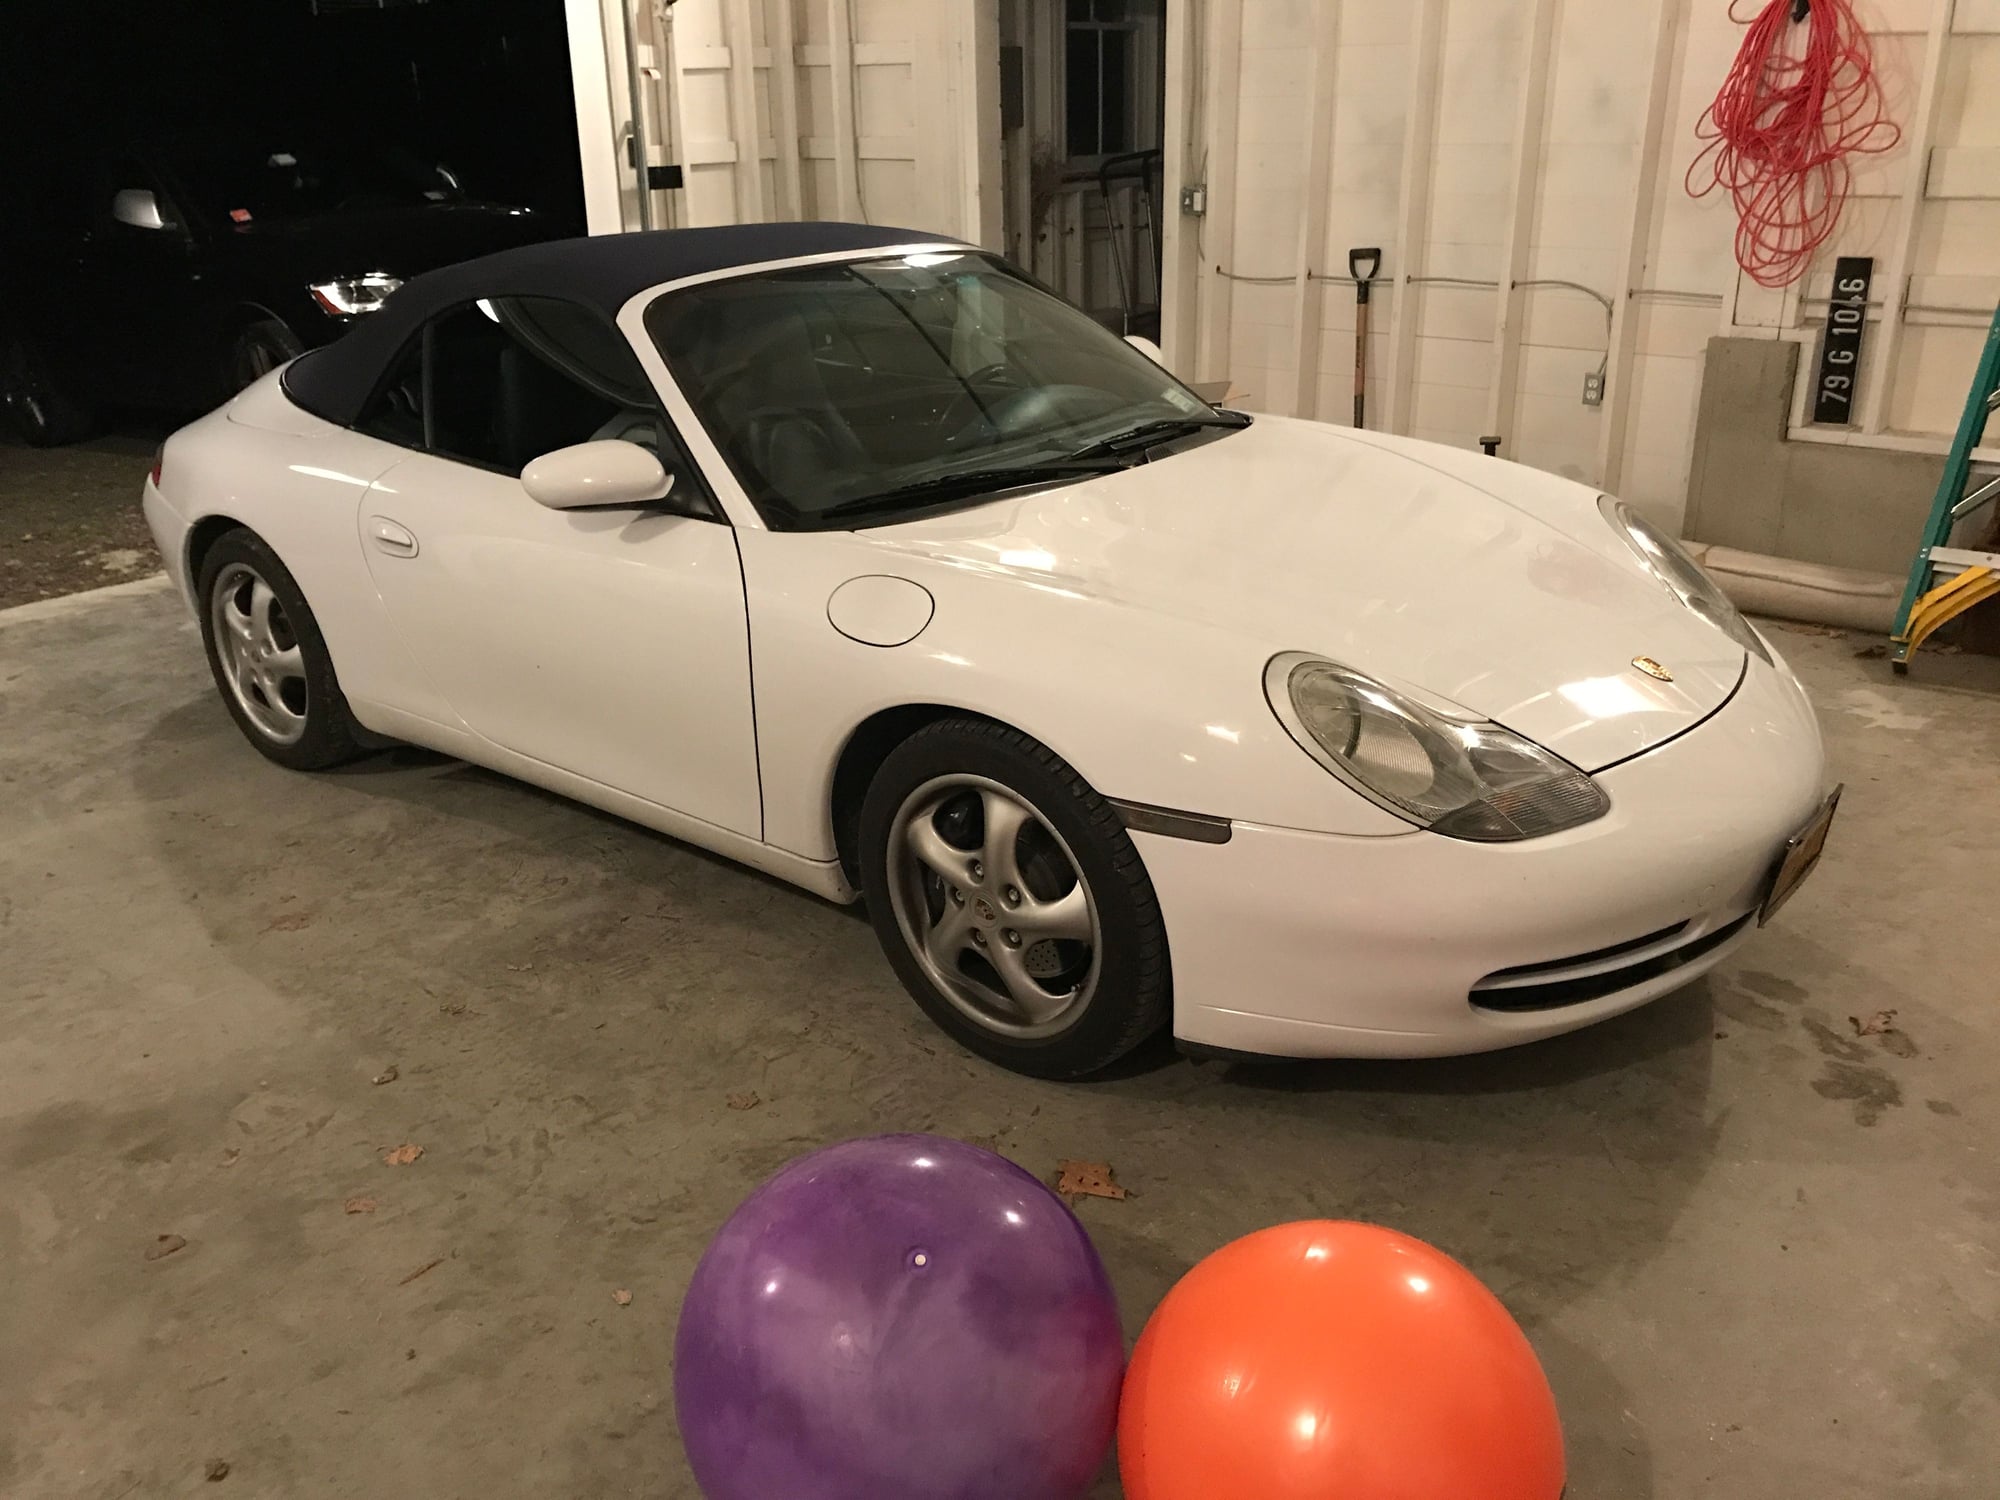 1999 - 2004 Porsche 911 - Swap my MT 996 for a Tip 996 Coupe/Targa? - Used - 60,000 Miles - 6 cyl - 2WD - Manual - Convertible - White - New Paltz, NY 12561, United States